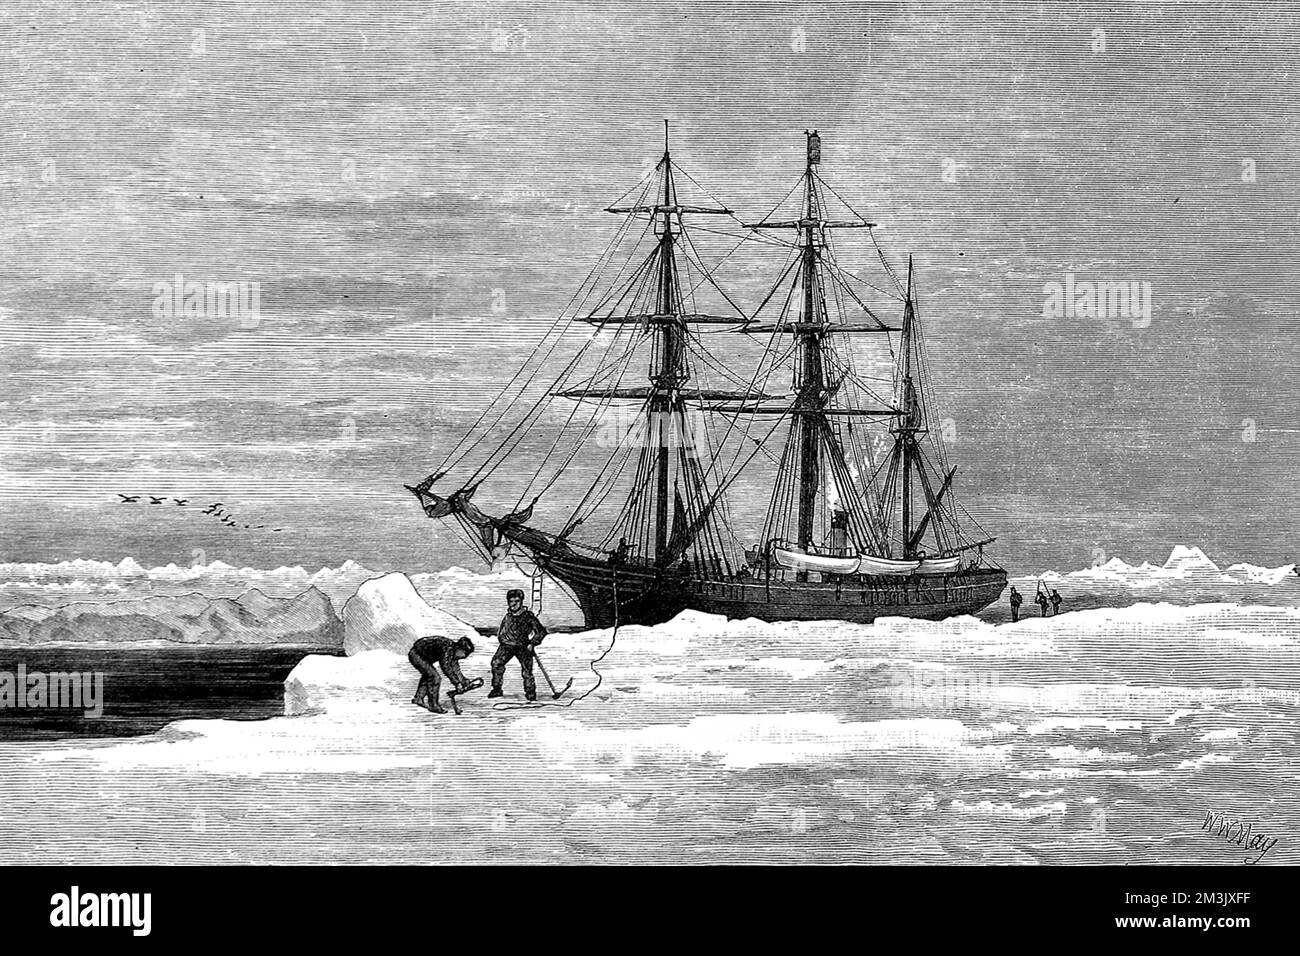 The yacht 'Eira', used by Benjamin Leigh Smith, to explore the Arctic region around Franz Joseph Land and the ocean North of Russia, 1881-1882.  The 'Eira' was caught in the ice and sank off Cape Flora in August 1881. The crew then endured an epic journey to safety, dragging the ship's boats over ice and sailing through a strong gale to try to reach Nova Zembla. They were rescued by Sir Allen Young in the ship 'Hope' at Matotchkin Strait, August 1882.     Date: 1882 Stock Photo